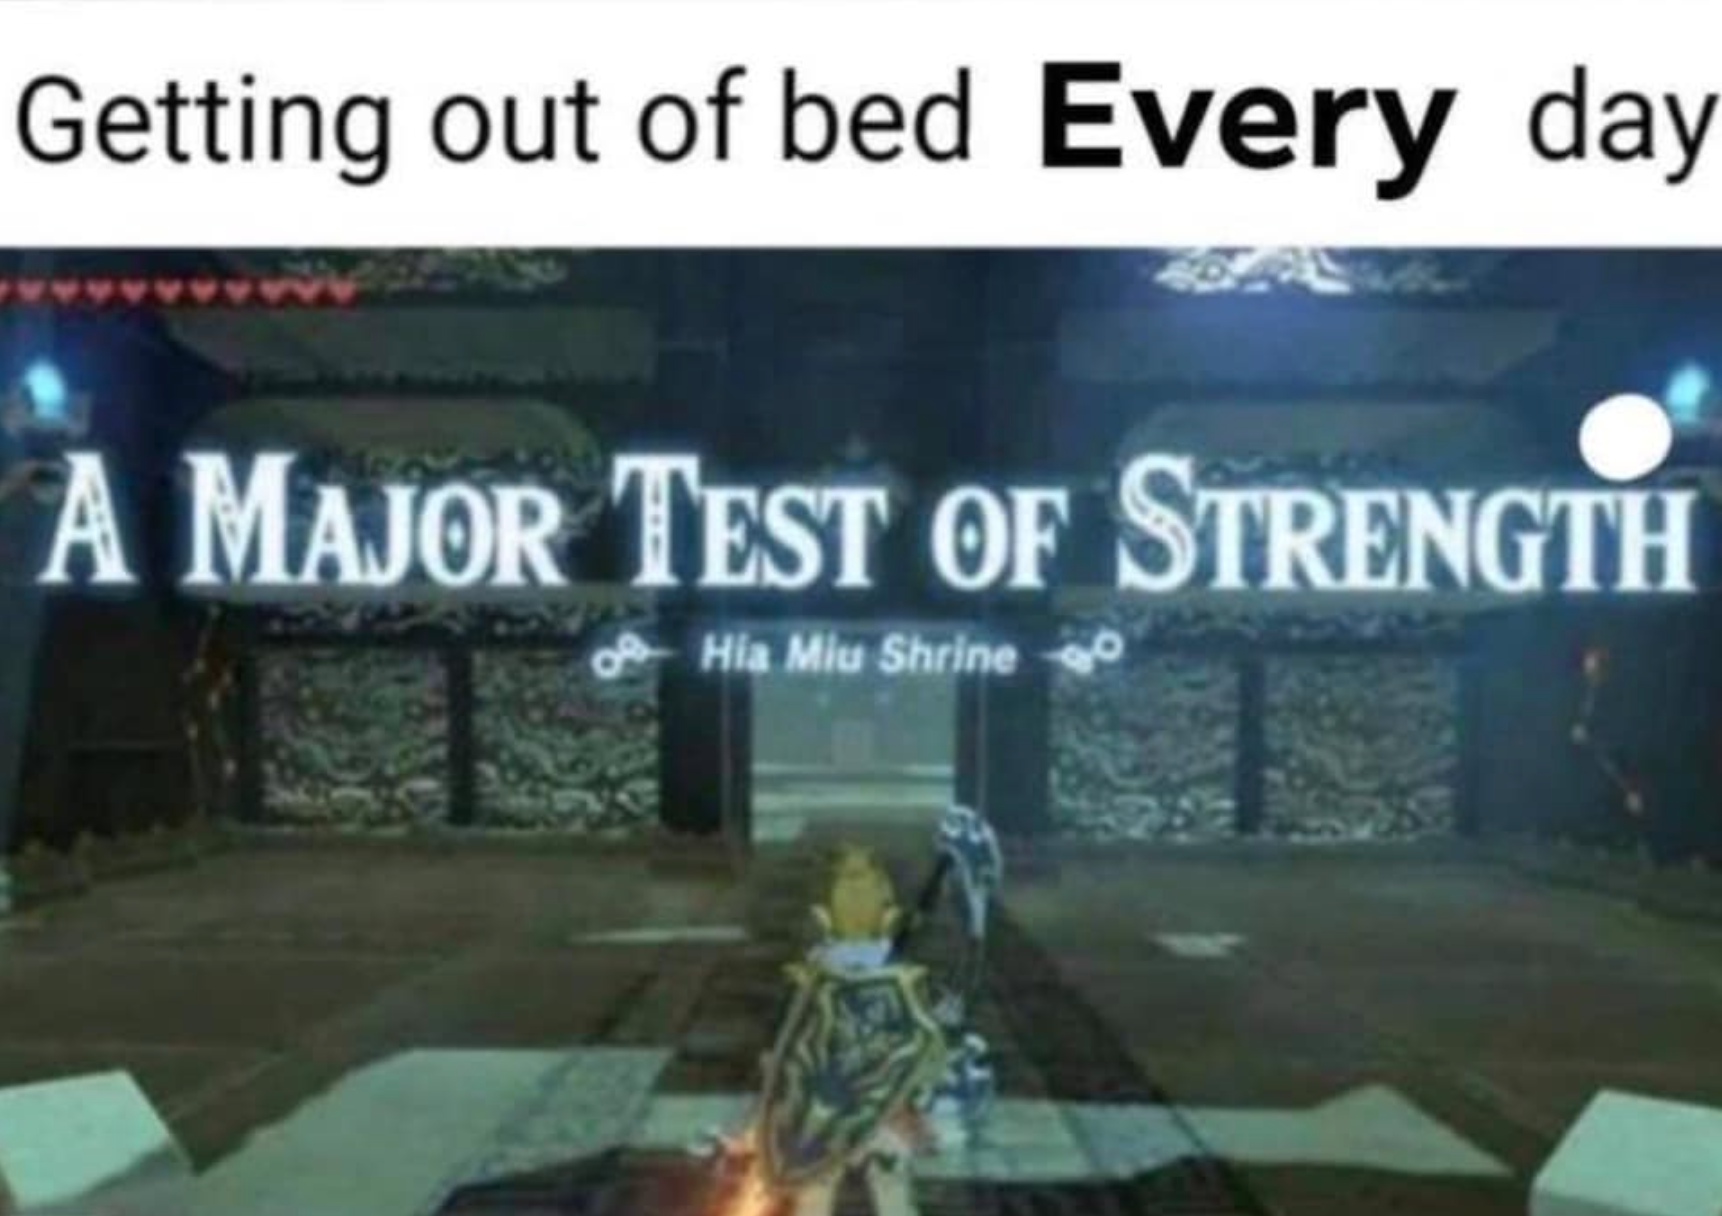 legend of zelda breath of the wild memes - Getting out of bed Every day A Major Test Of Strength Hia Miu Shrine